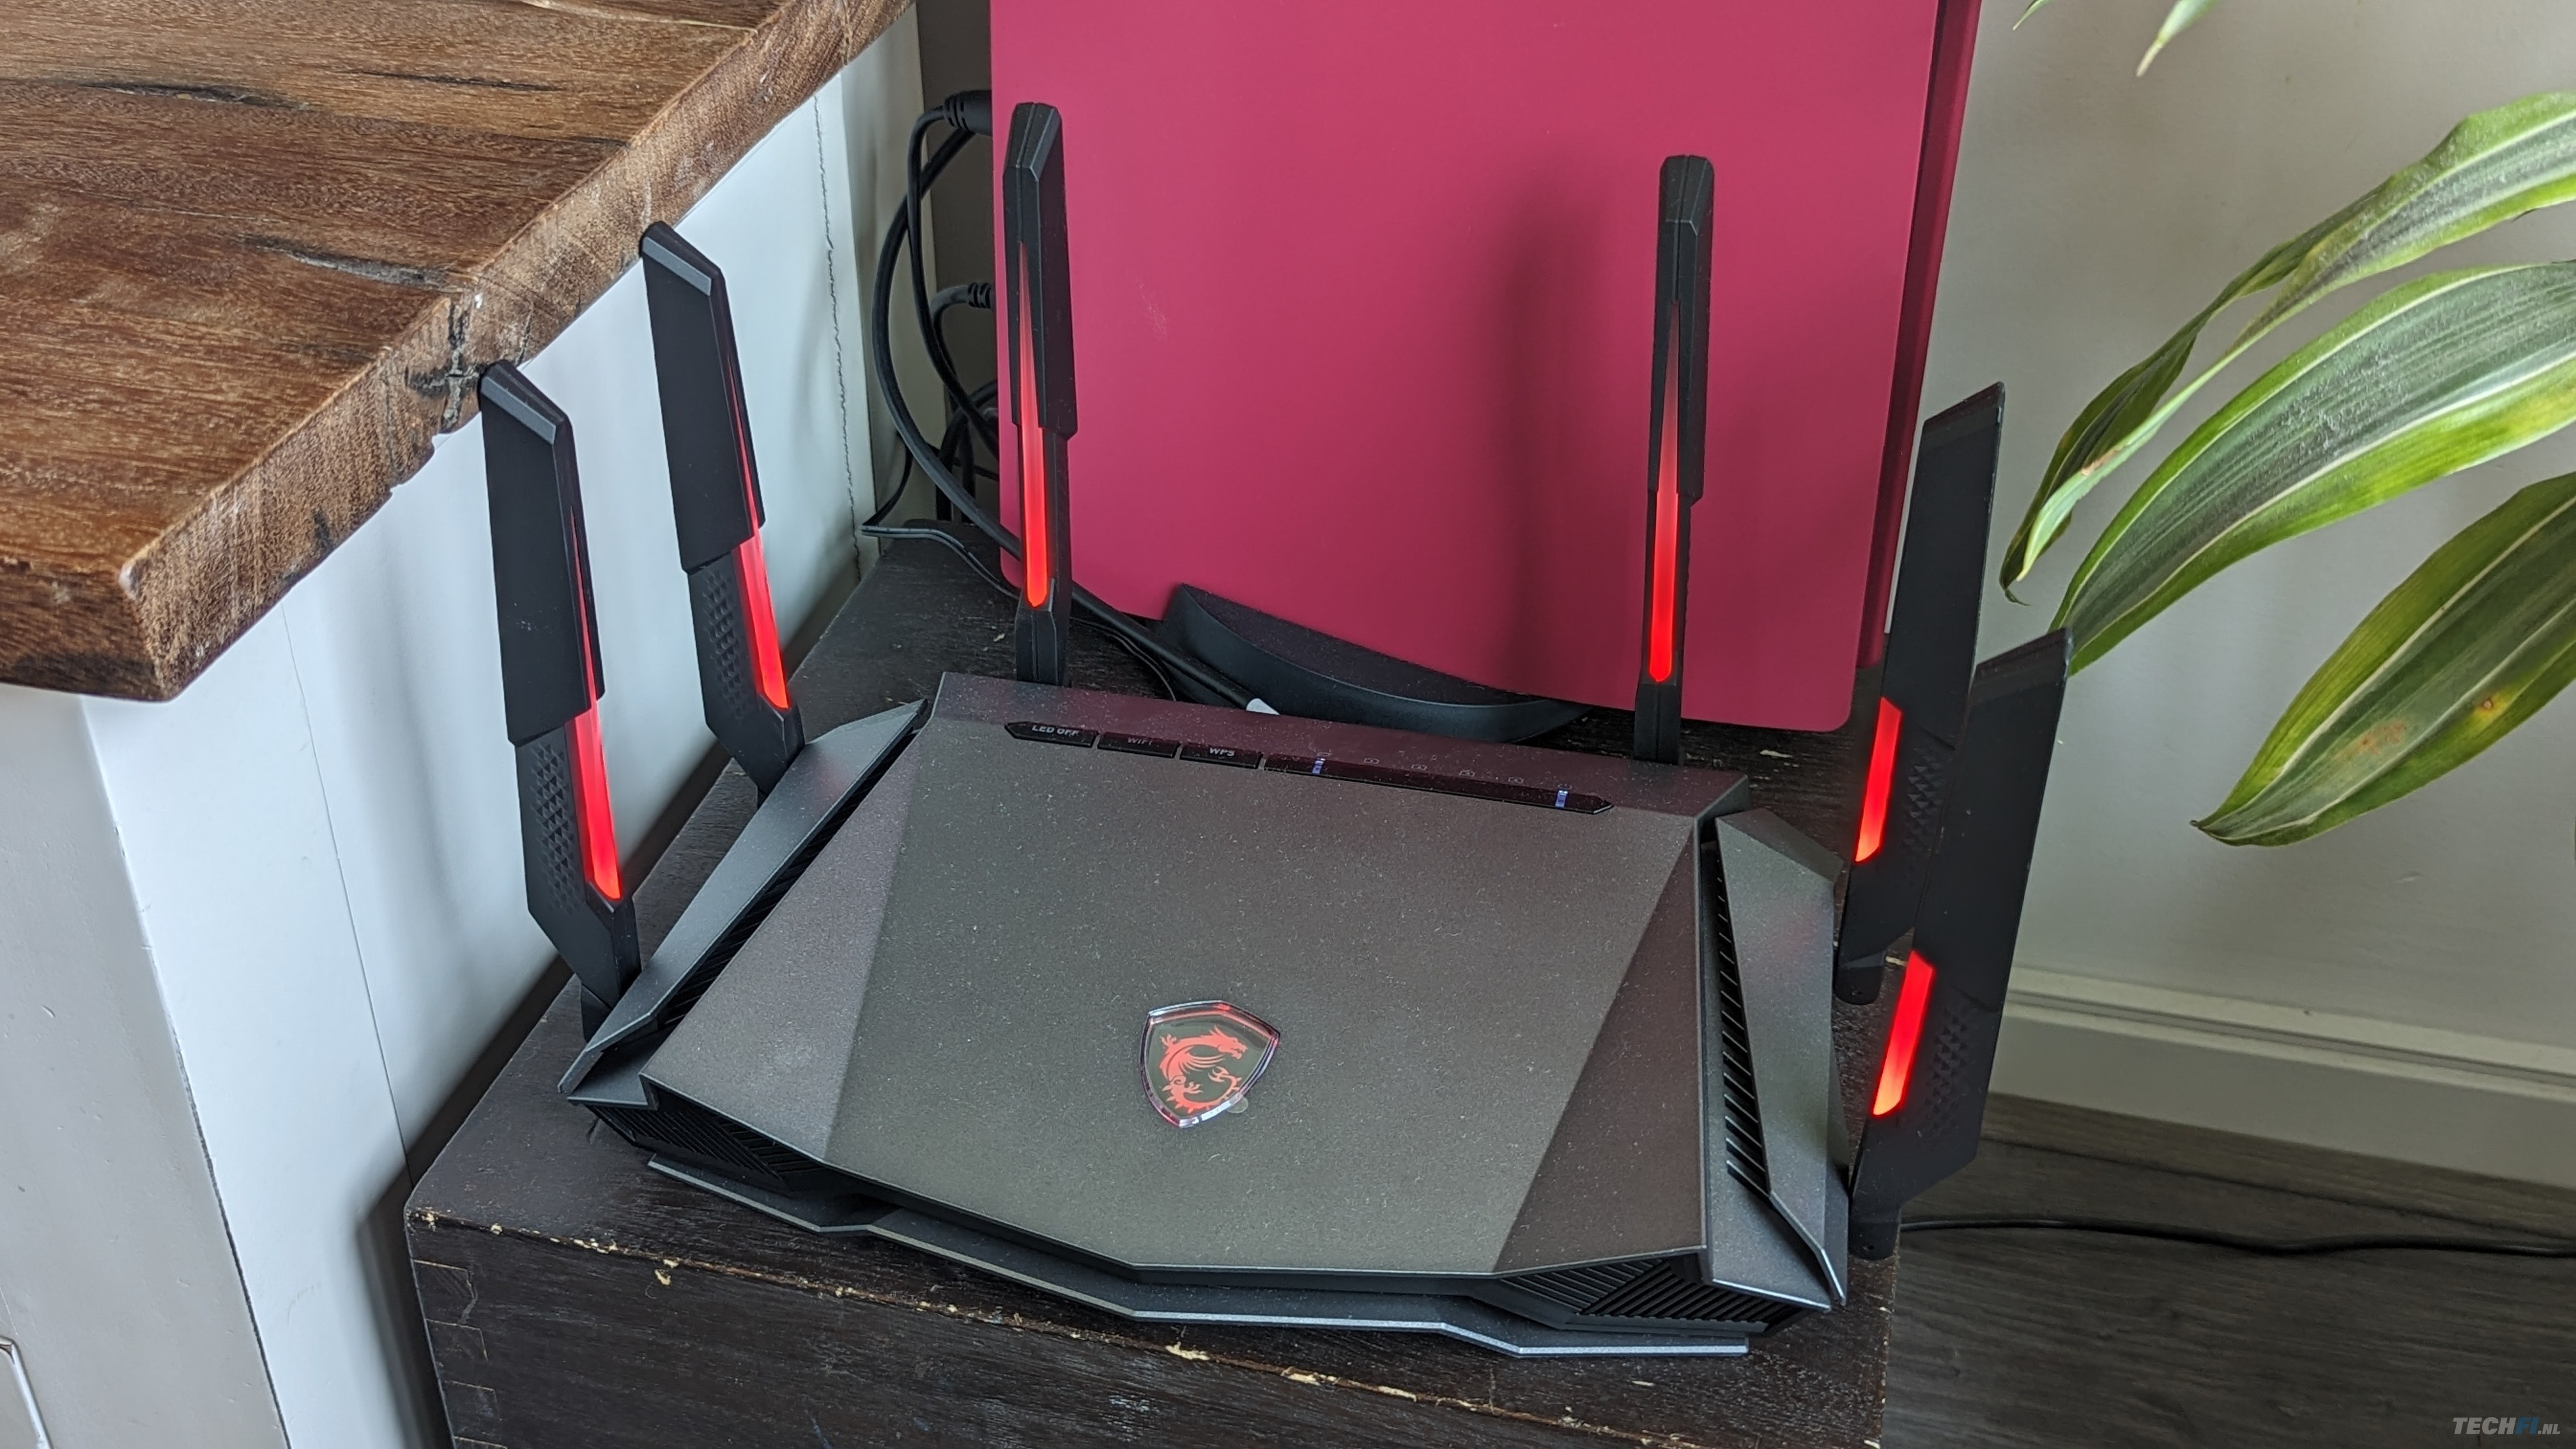 MSI RadiX AXE6600 review: gaming router met RGB-verlichting